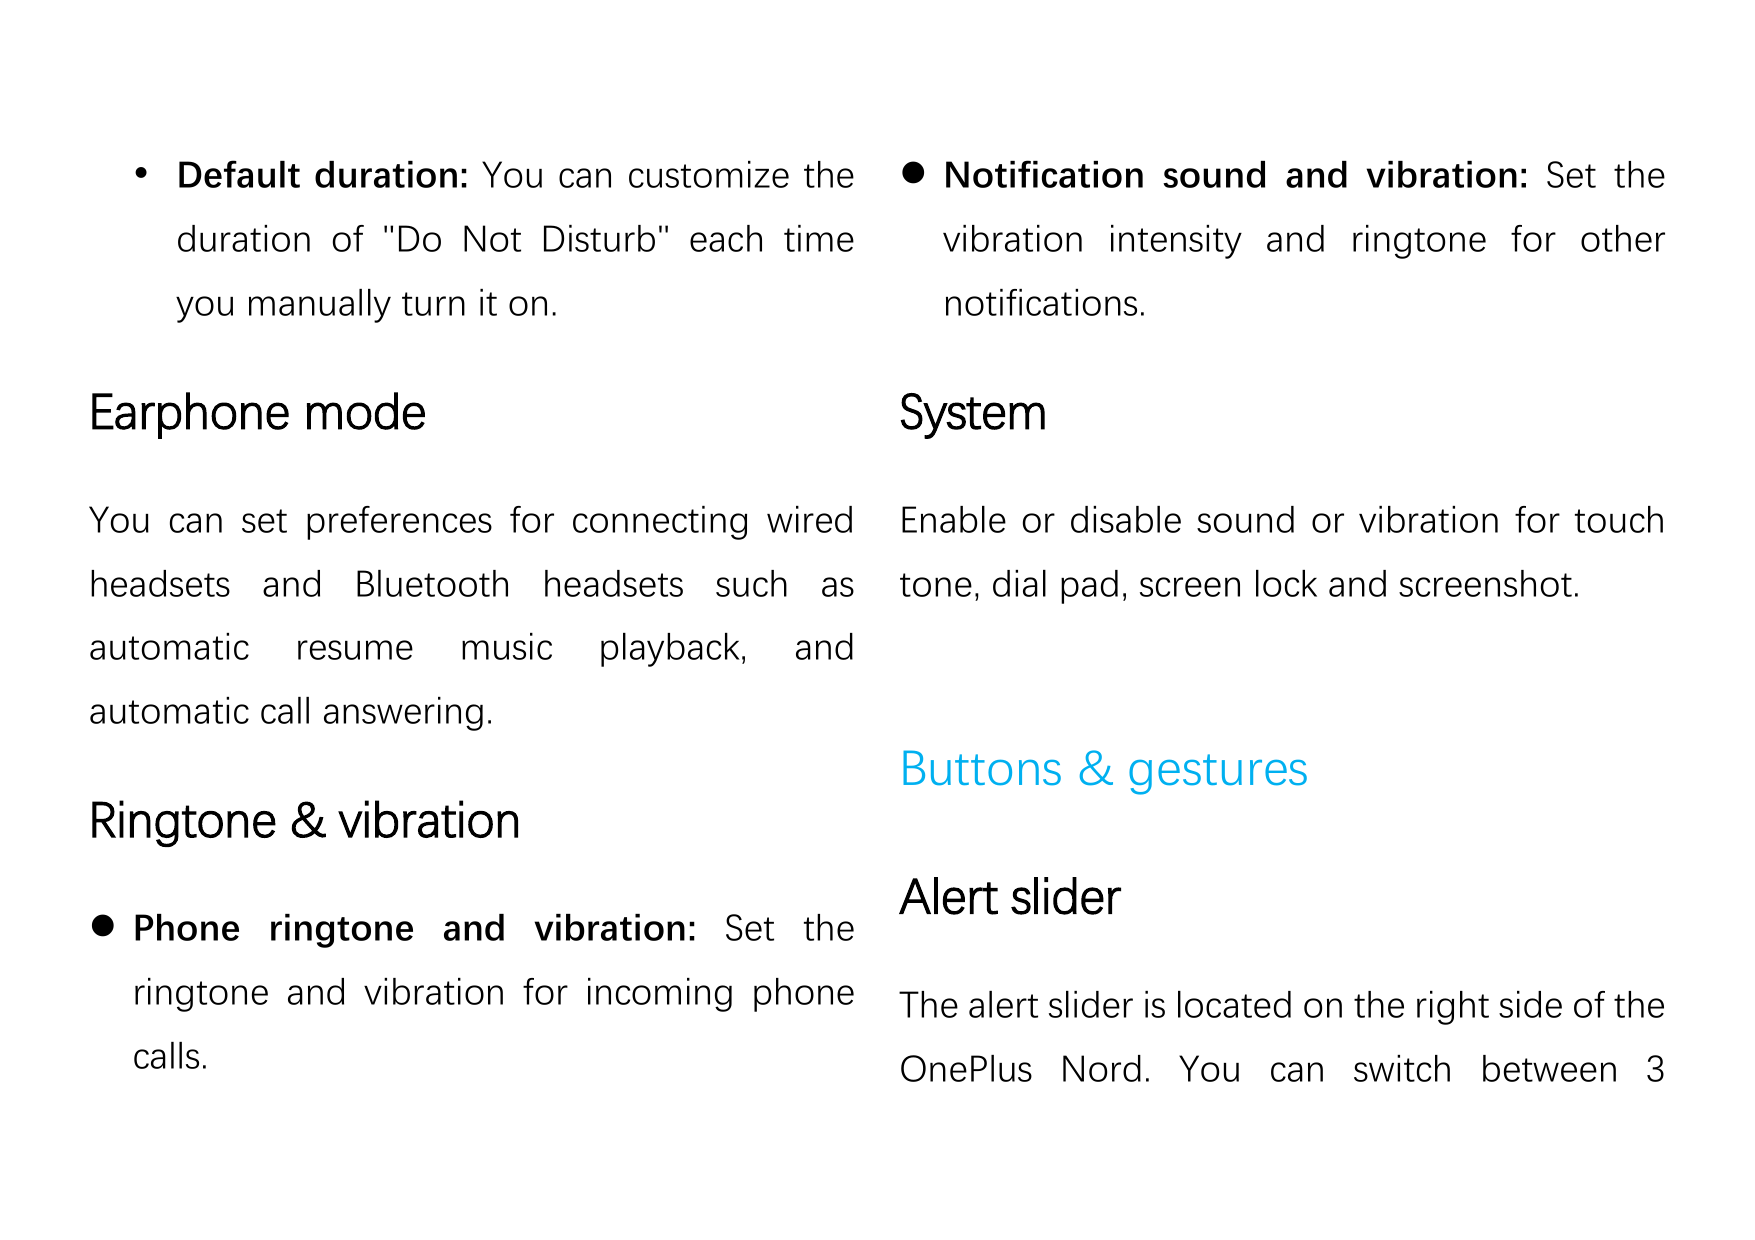  Default duration: You can customize the Notification sound and vibration: Set theduration of "Do Not Disturb" each timevibrat